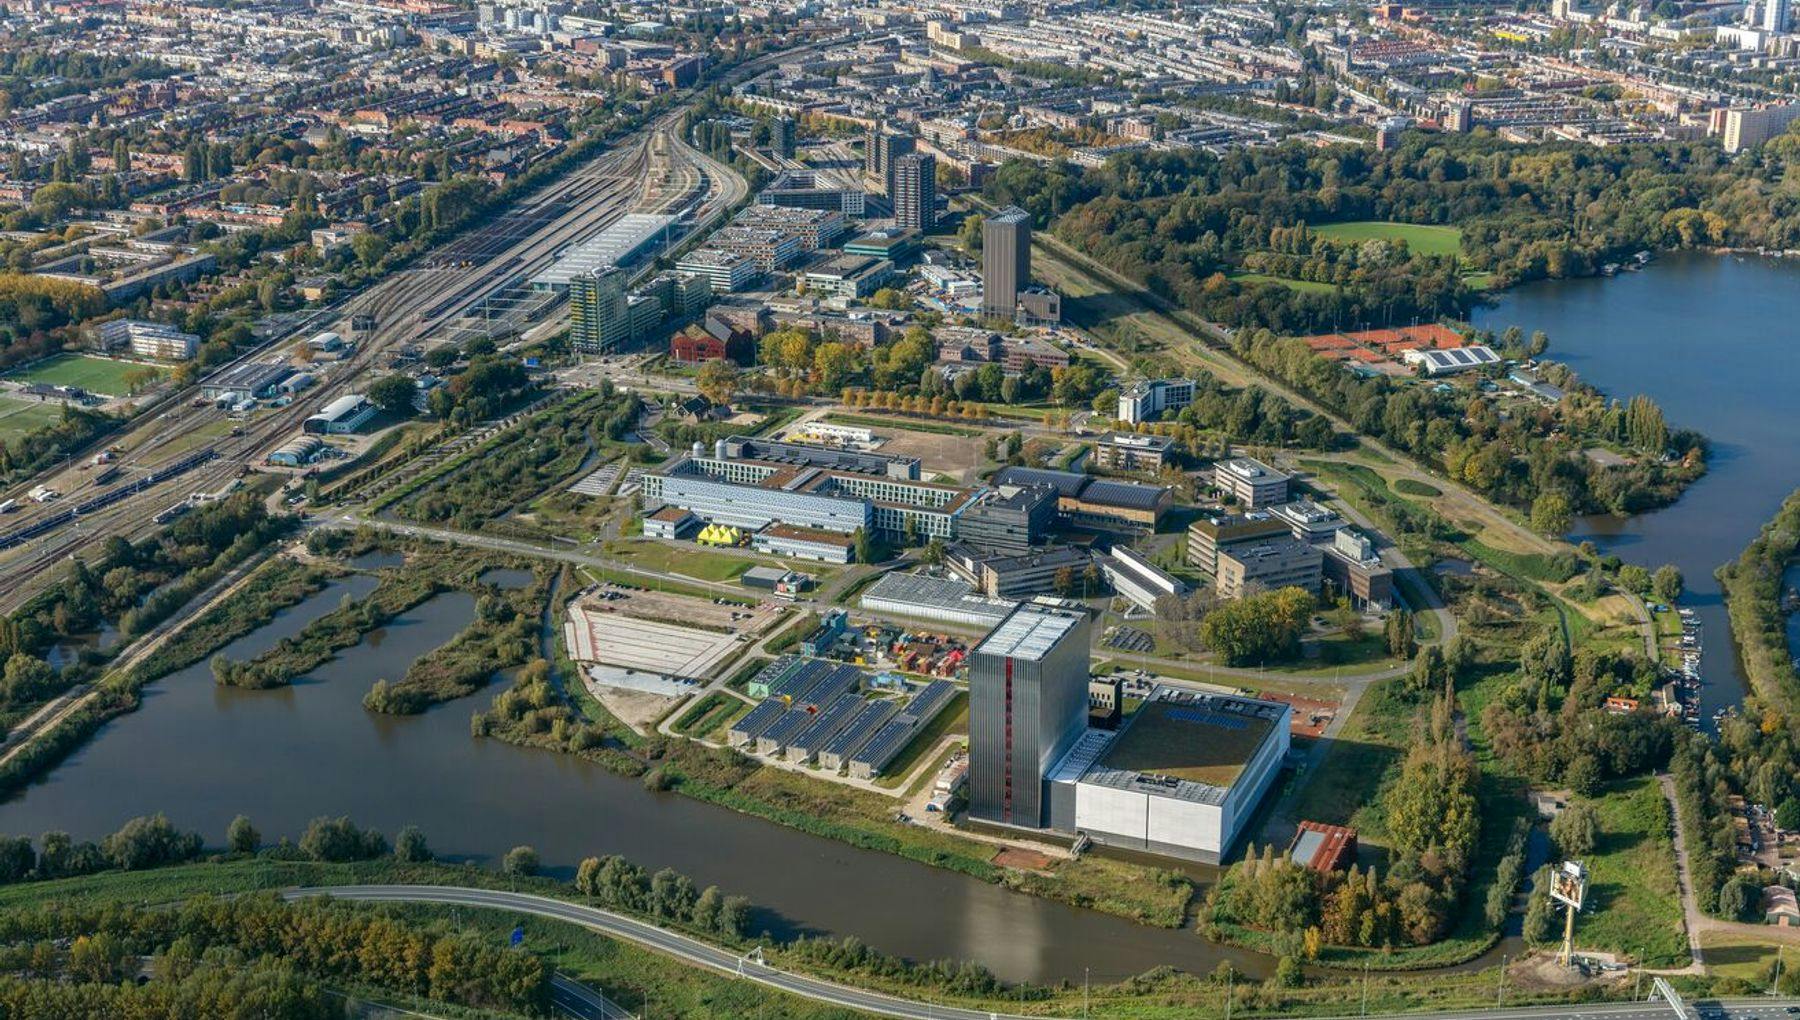 Air photo from Amsterdam Science Park